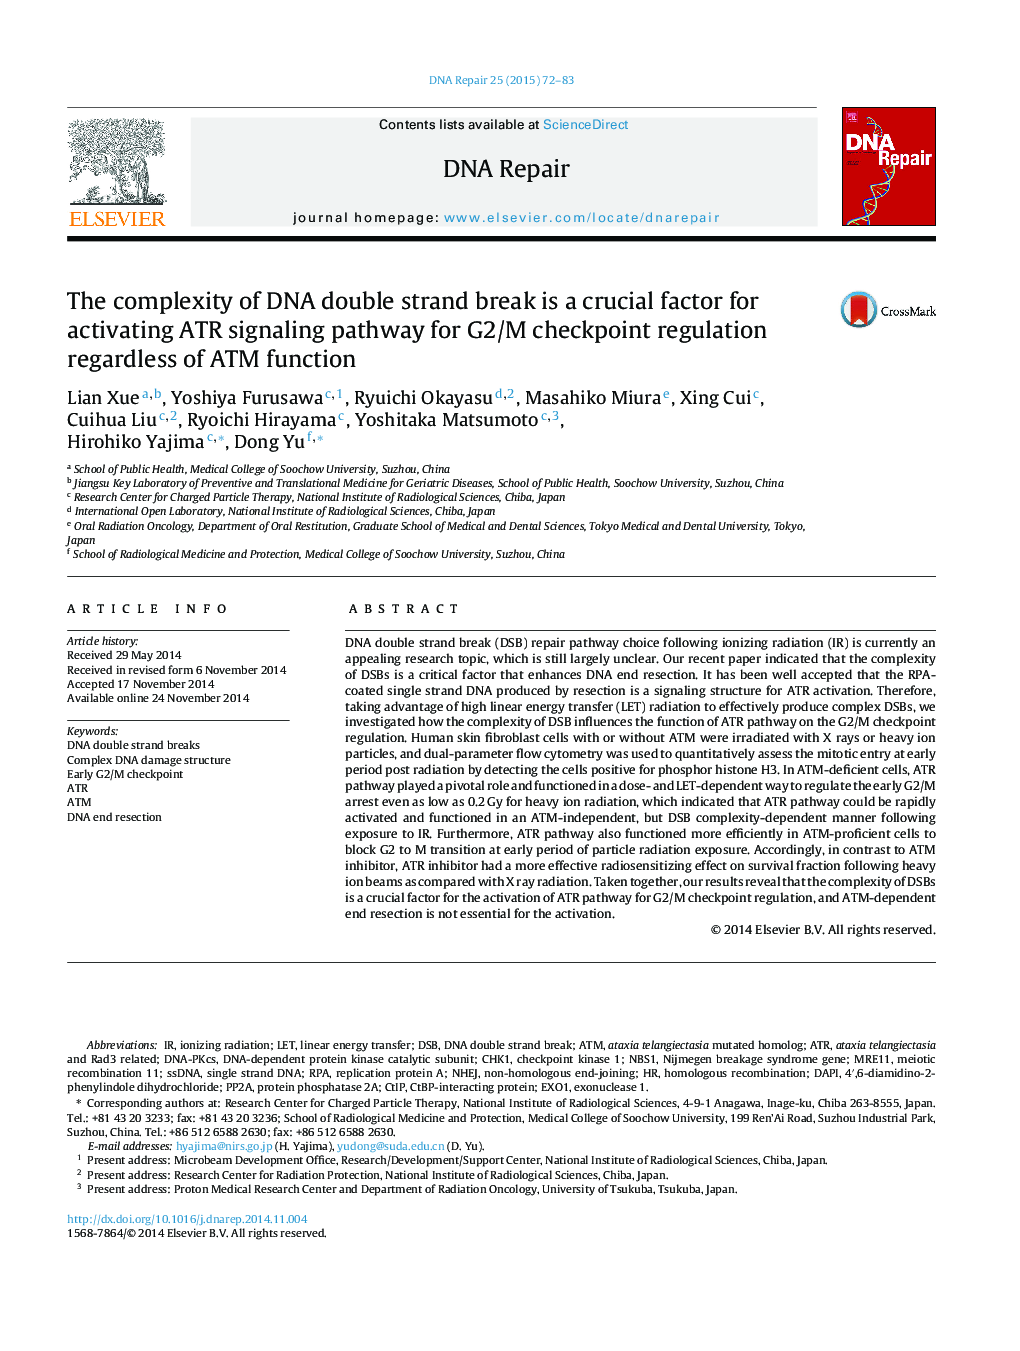 The complexity of DNA double strand break is a crucial factor for activating ATR signaling pathway for G2/M checkpoint regulation regardless of ATM function